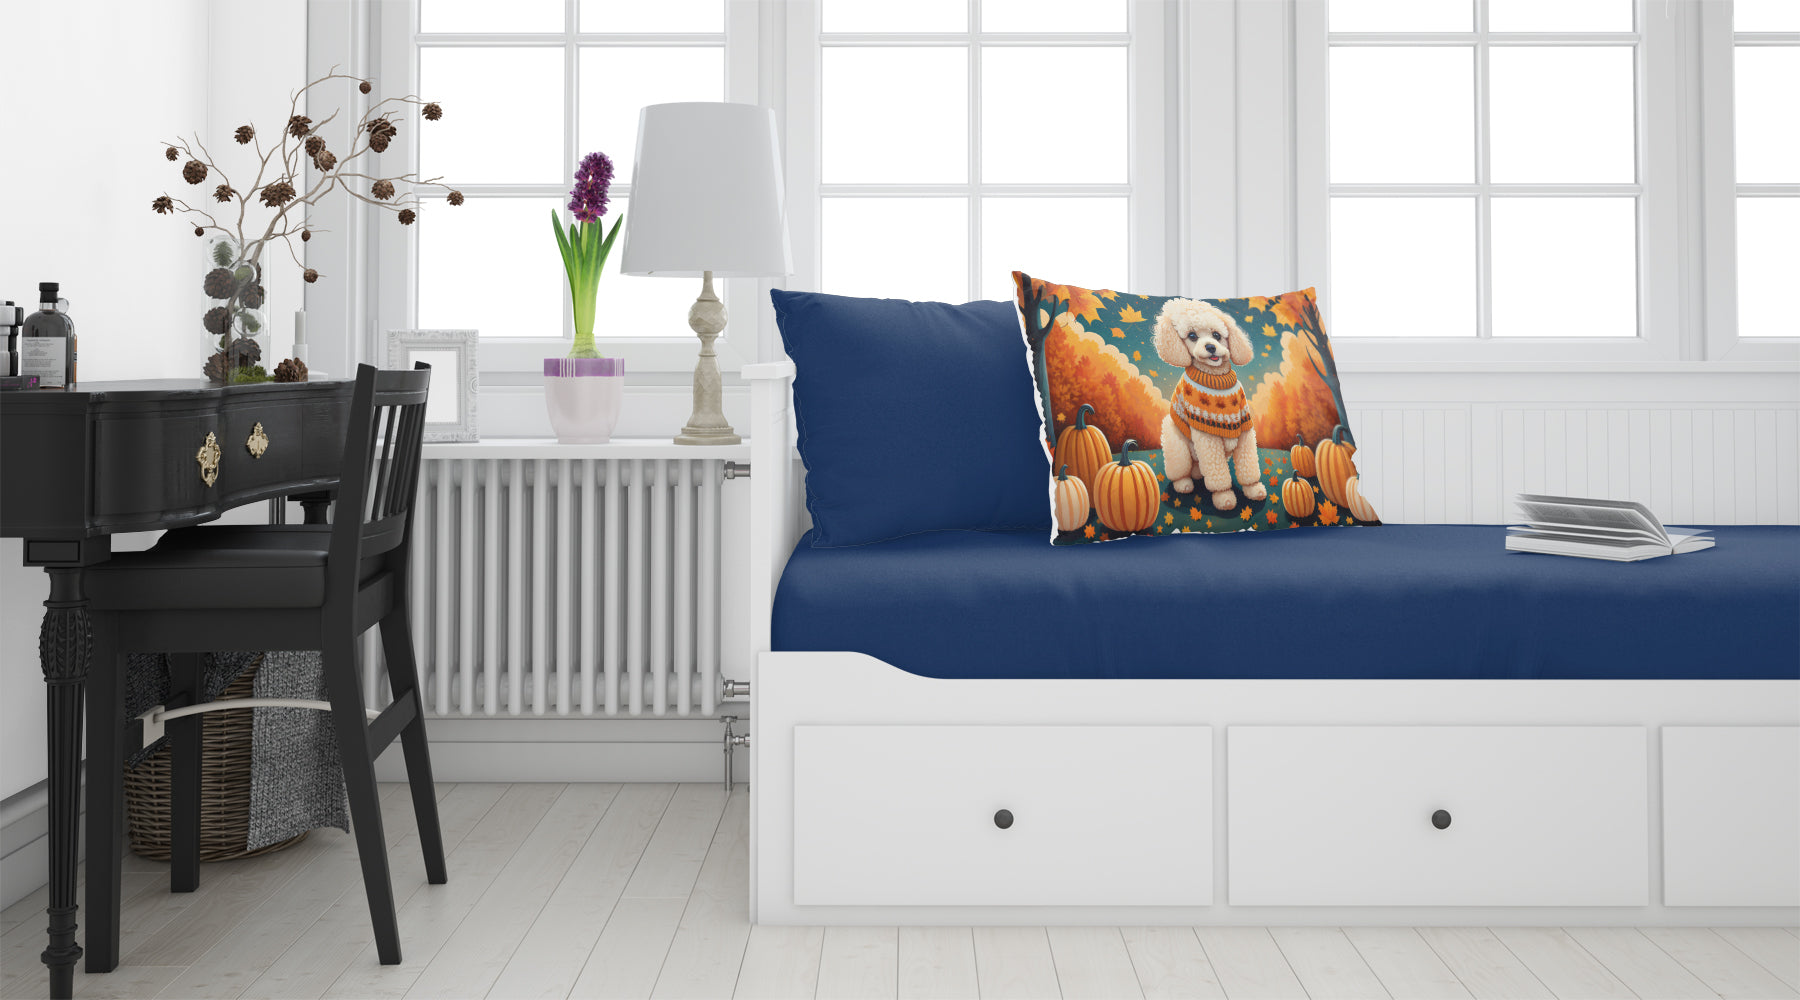 Buy this Poodle Fall Fabric Standard Pillowcase